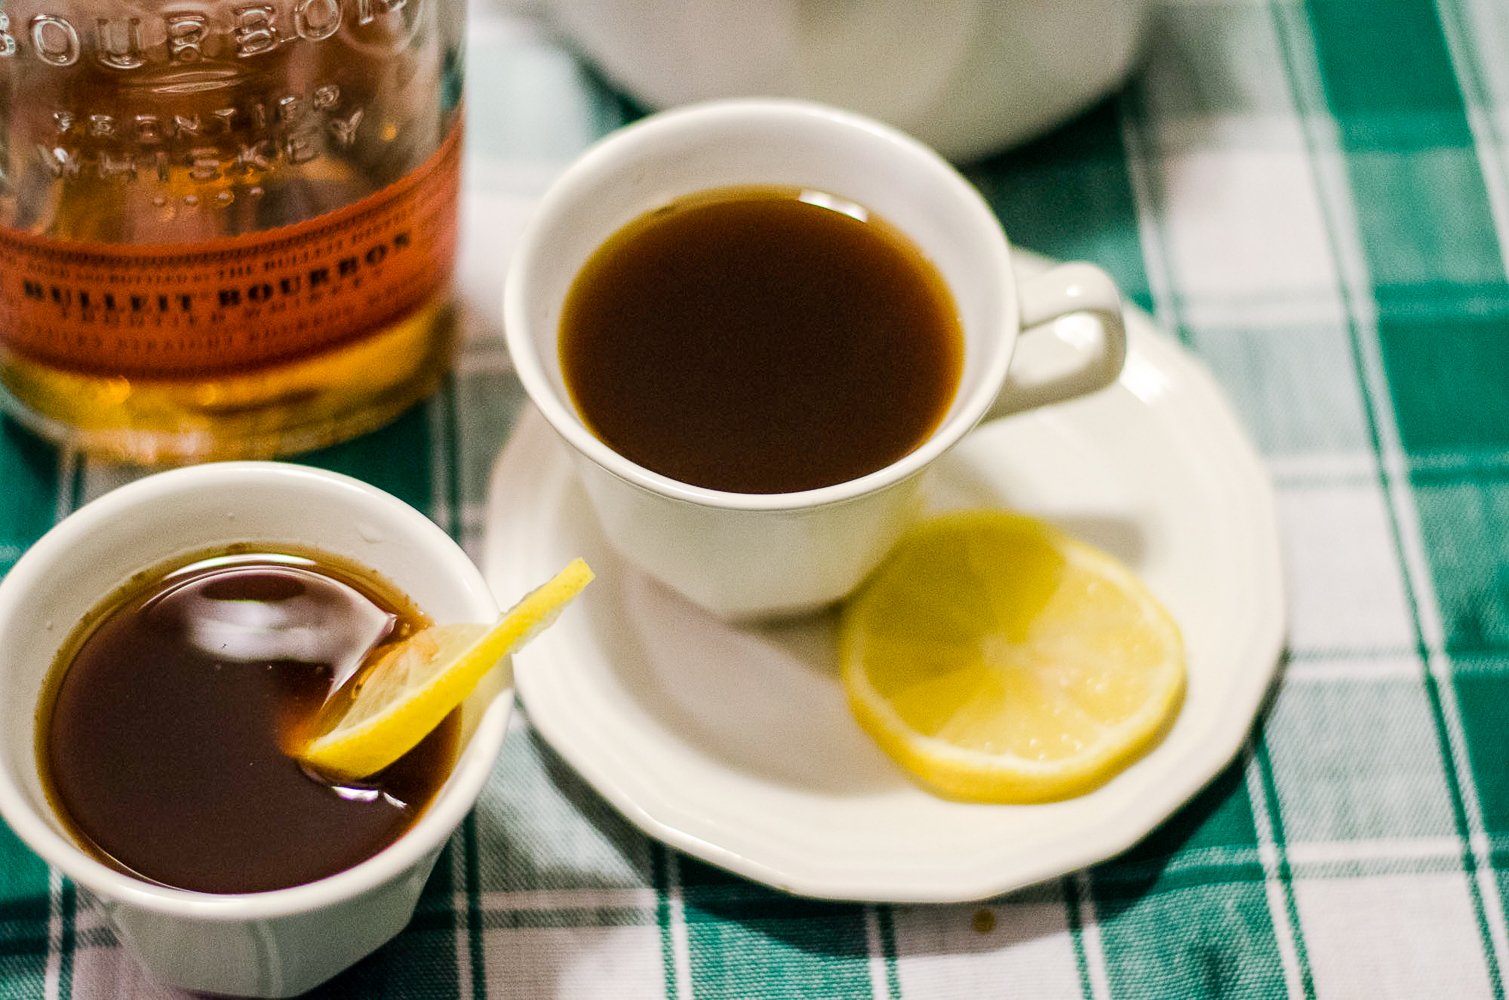 The Kentucky Gent, a Louisville, Kentucky life and style blogger, shares his recipe for a Hot Toddy.